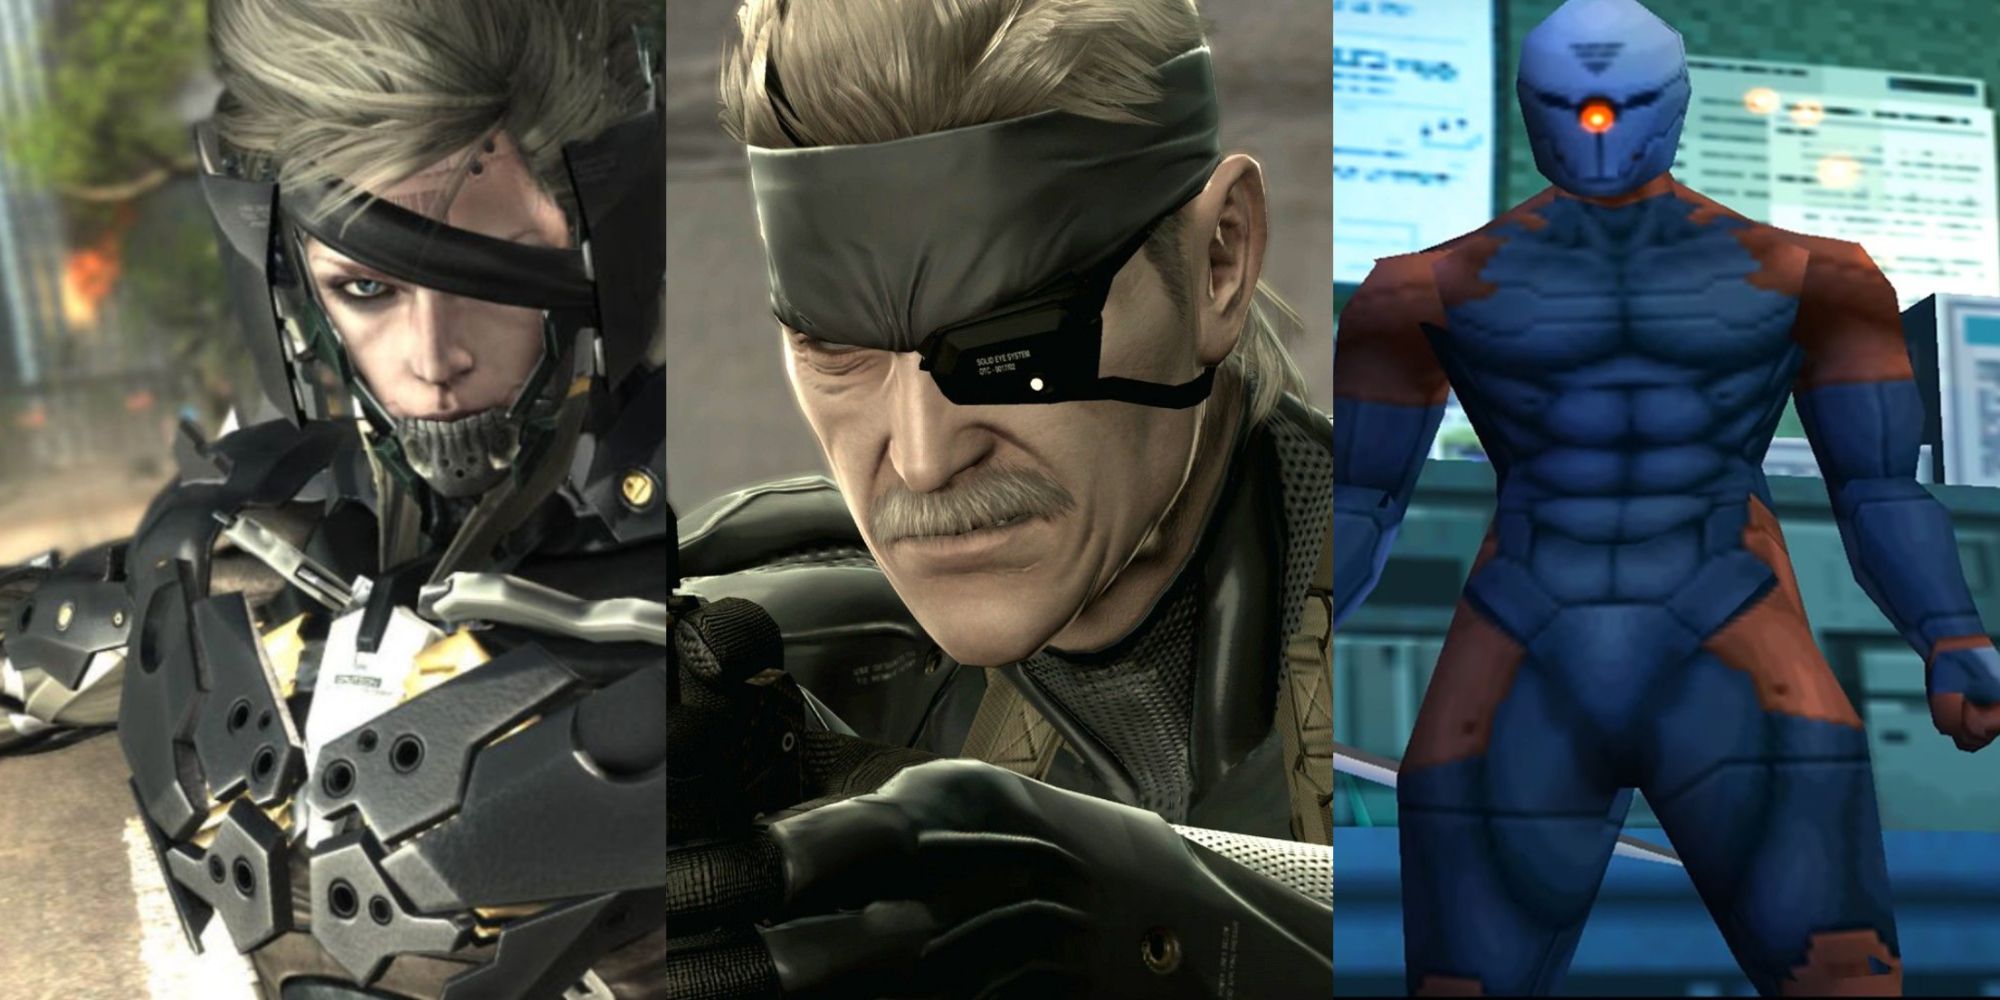 Best Metal Gear Games Featured Split Image Raiden, Old Snake, And Gray Fox